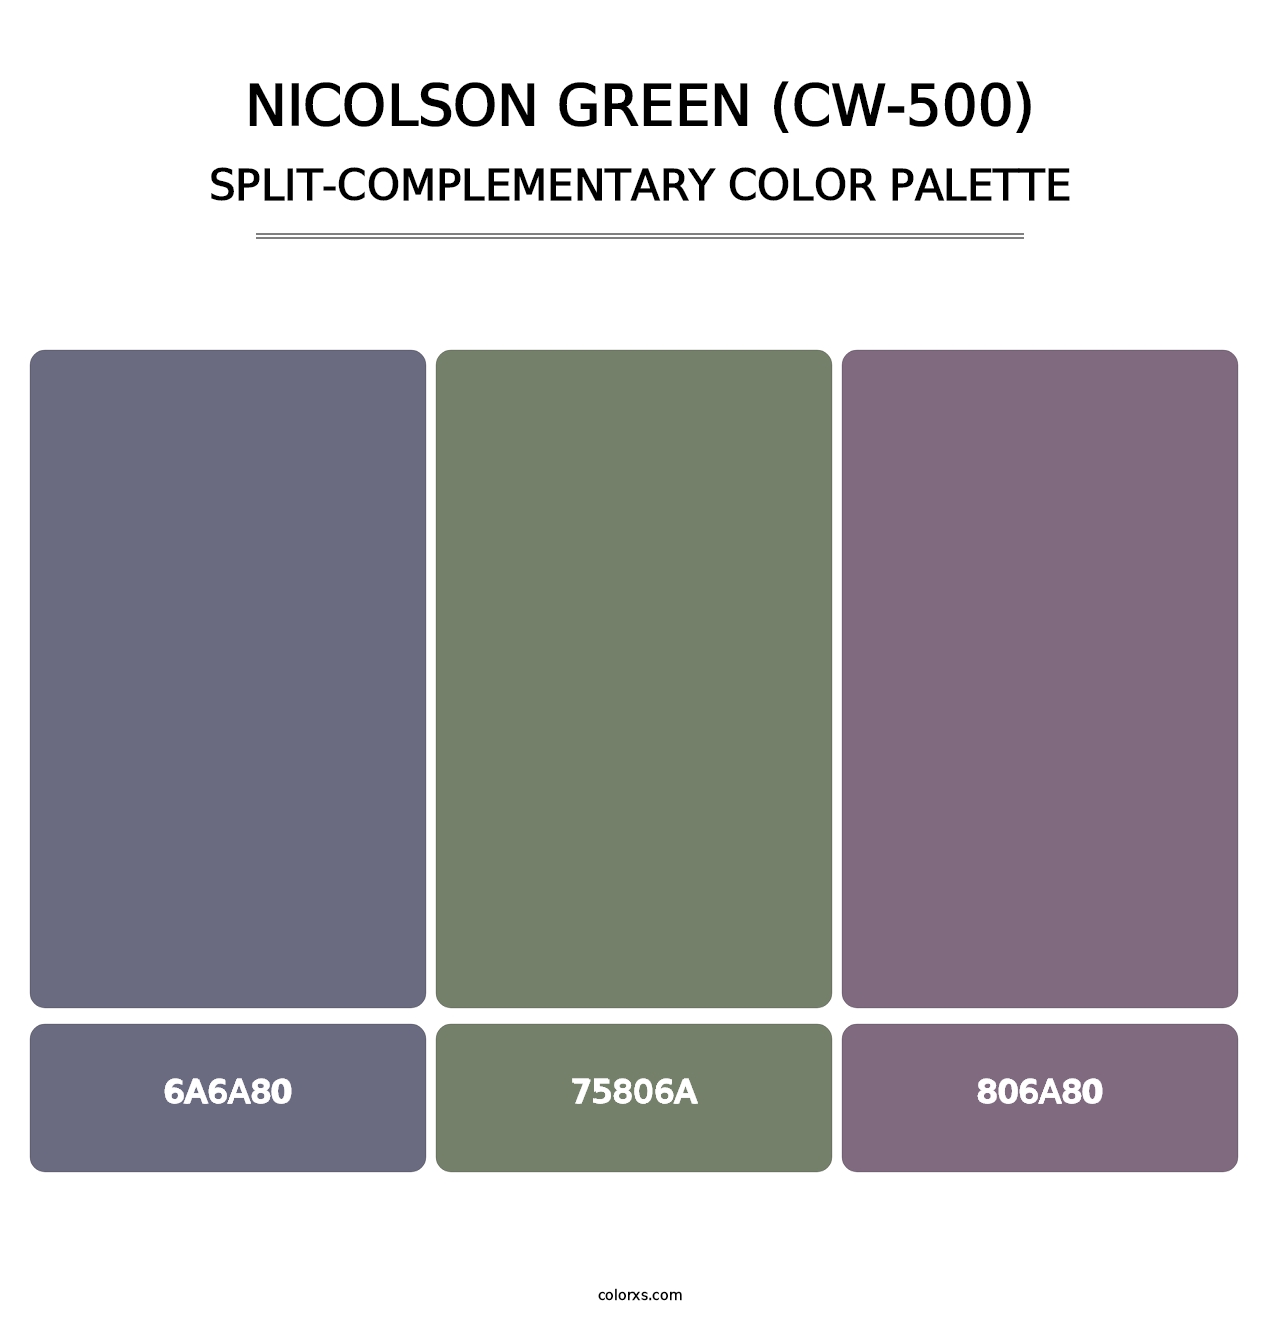 Nicolson Green (CW-500) - Split-Complementary Color Palette